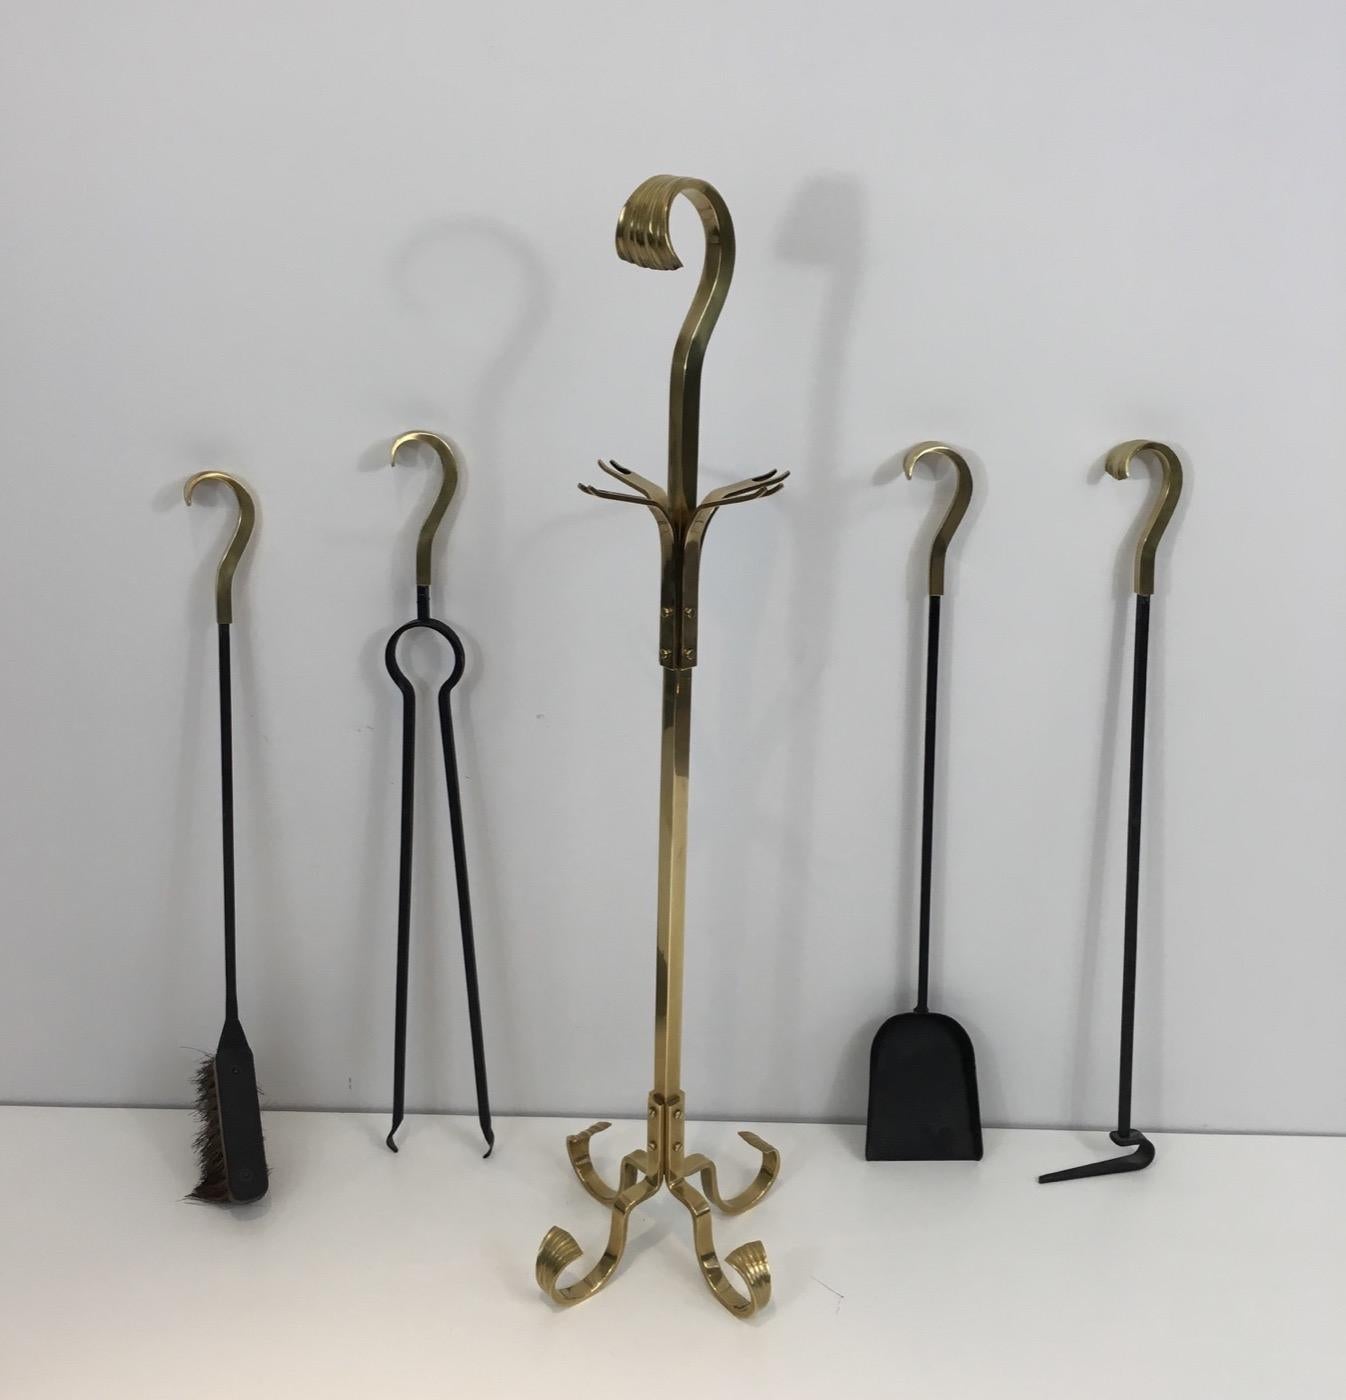 These unusual fire place tools are made of brass and iron. This is a French work, circa 1970.